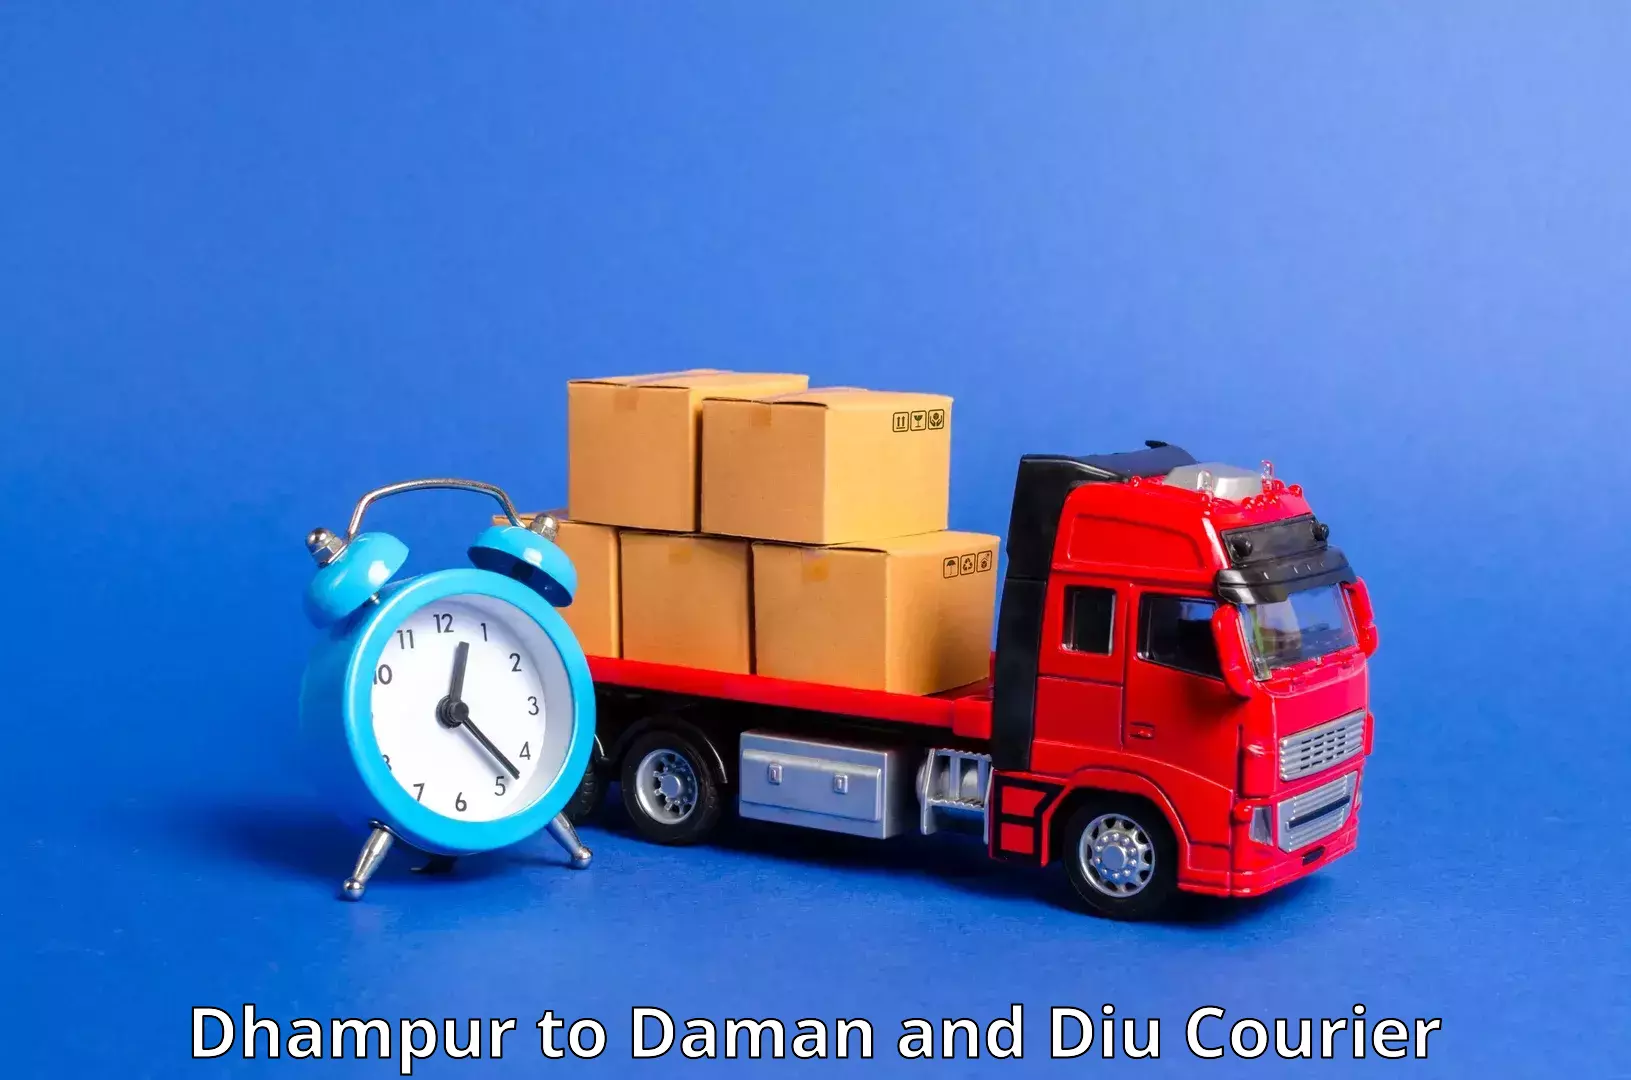 Affordable parcel service Dhampur to Daman and Diu